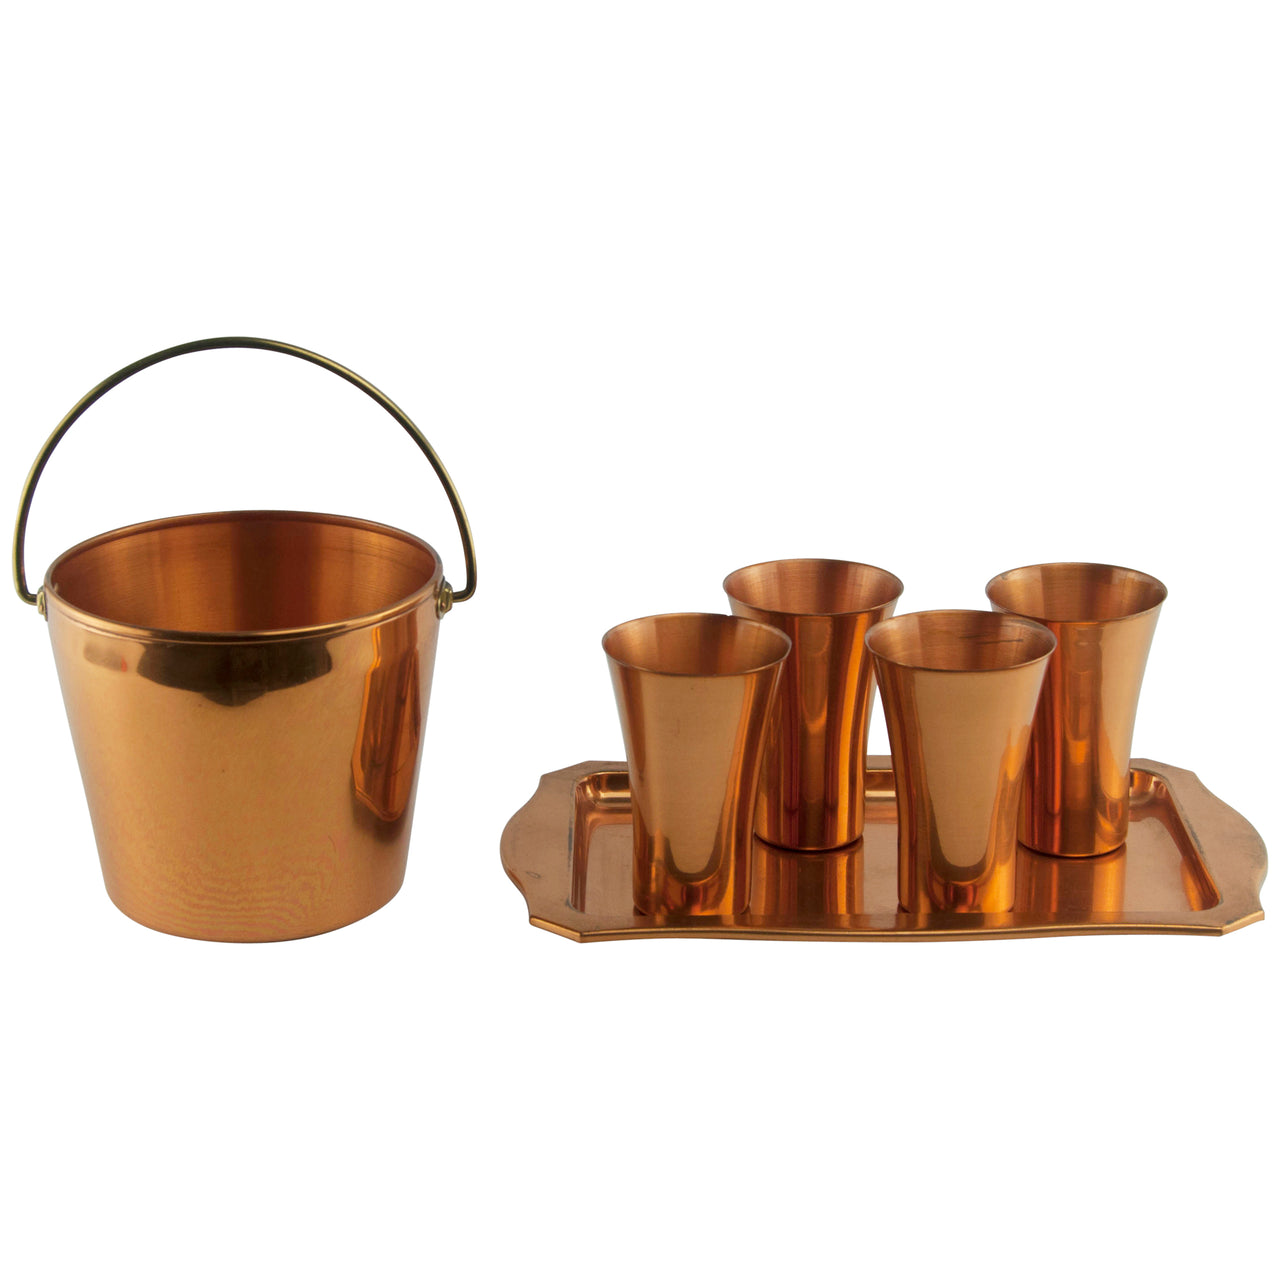 Vintage Copper Bucket With Metal Handle / Storage / Kitchen Display Decor /  Country / Farmhouse / Vase / Ice Bucket on Bar Cart / Planter 